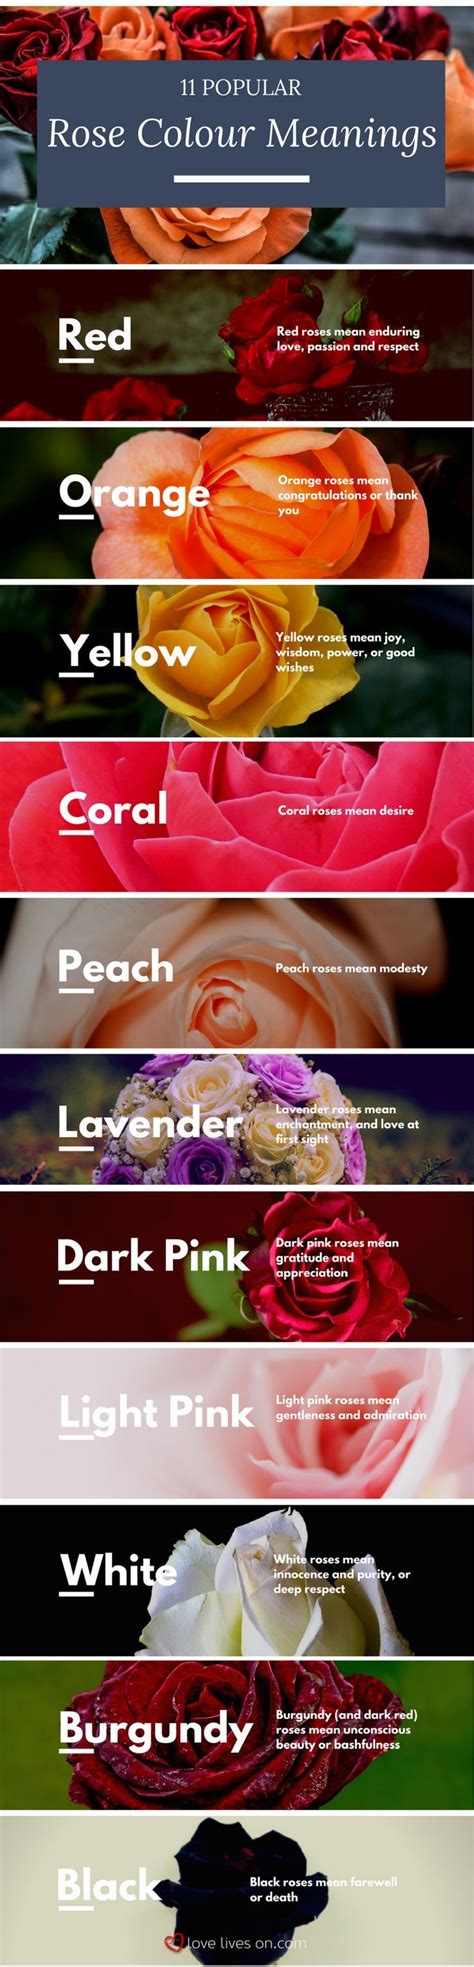 Funeral Flowers And Their Meanings The Ultimate Guide Rose Color